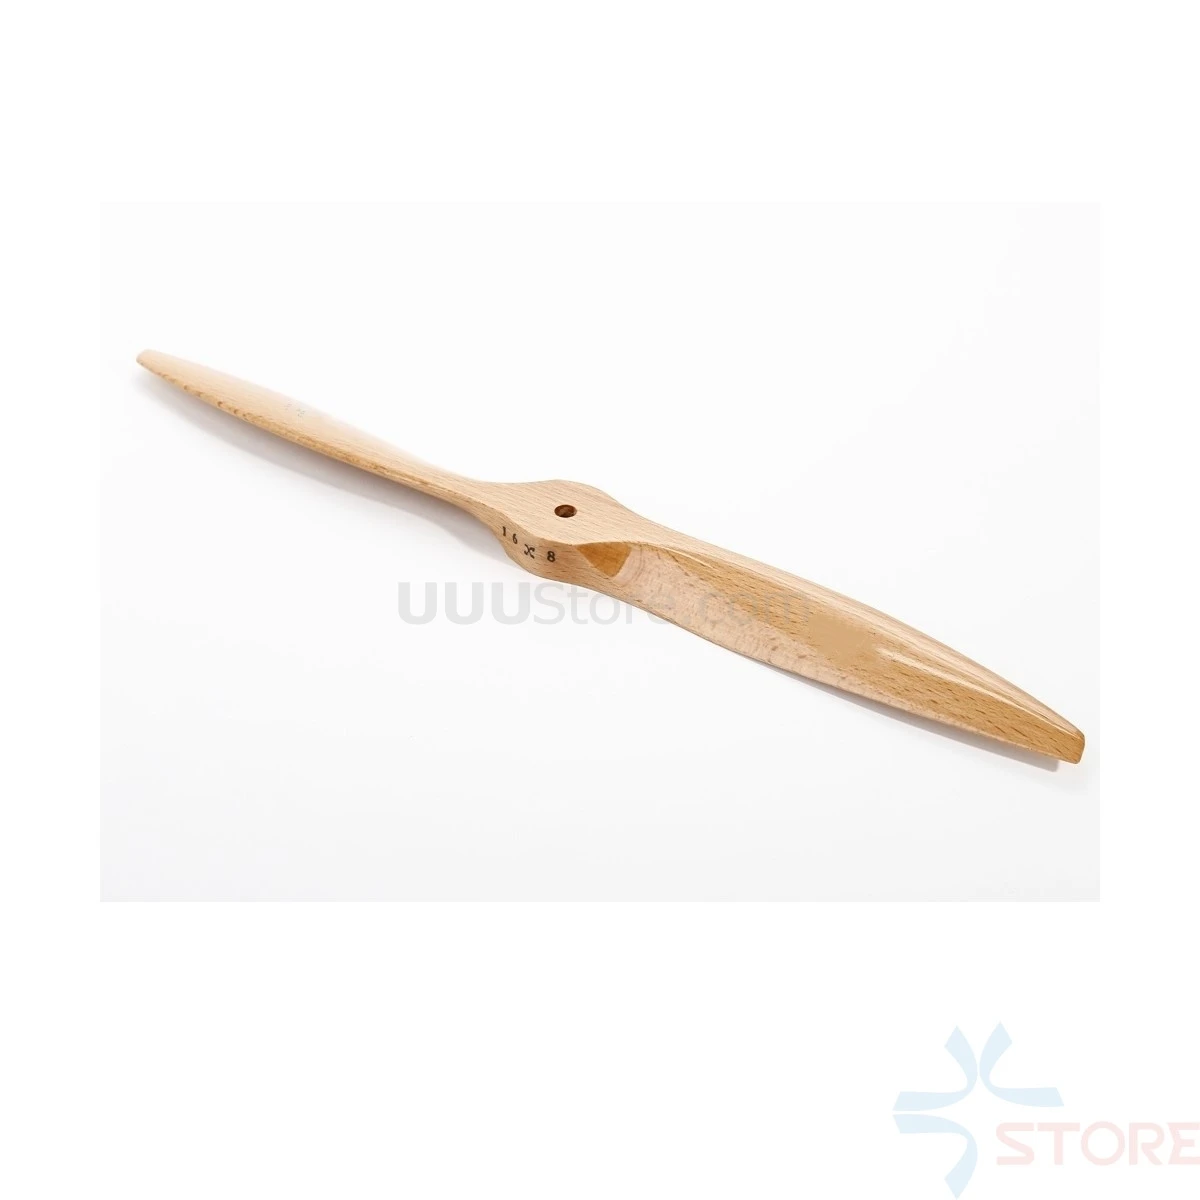 Wood Wooden Propeller 22x8,22x10,23x8,23x10 Prop for RC Aircraft Plane Airplane DLE55 Gasoline Engine 3